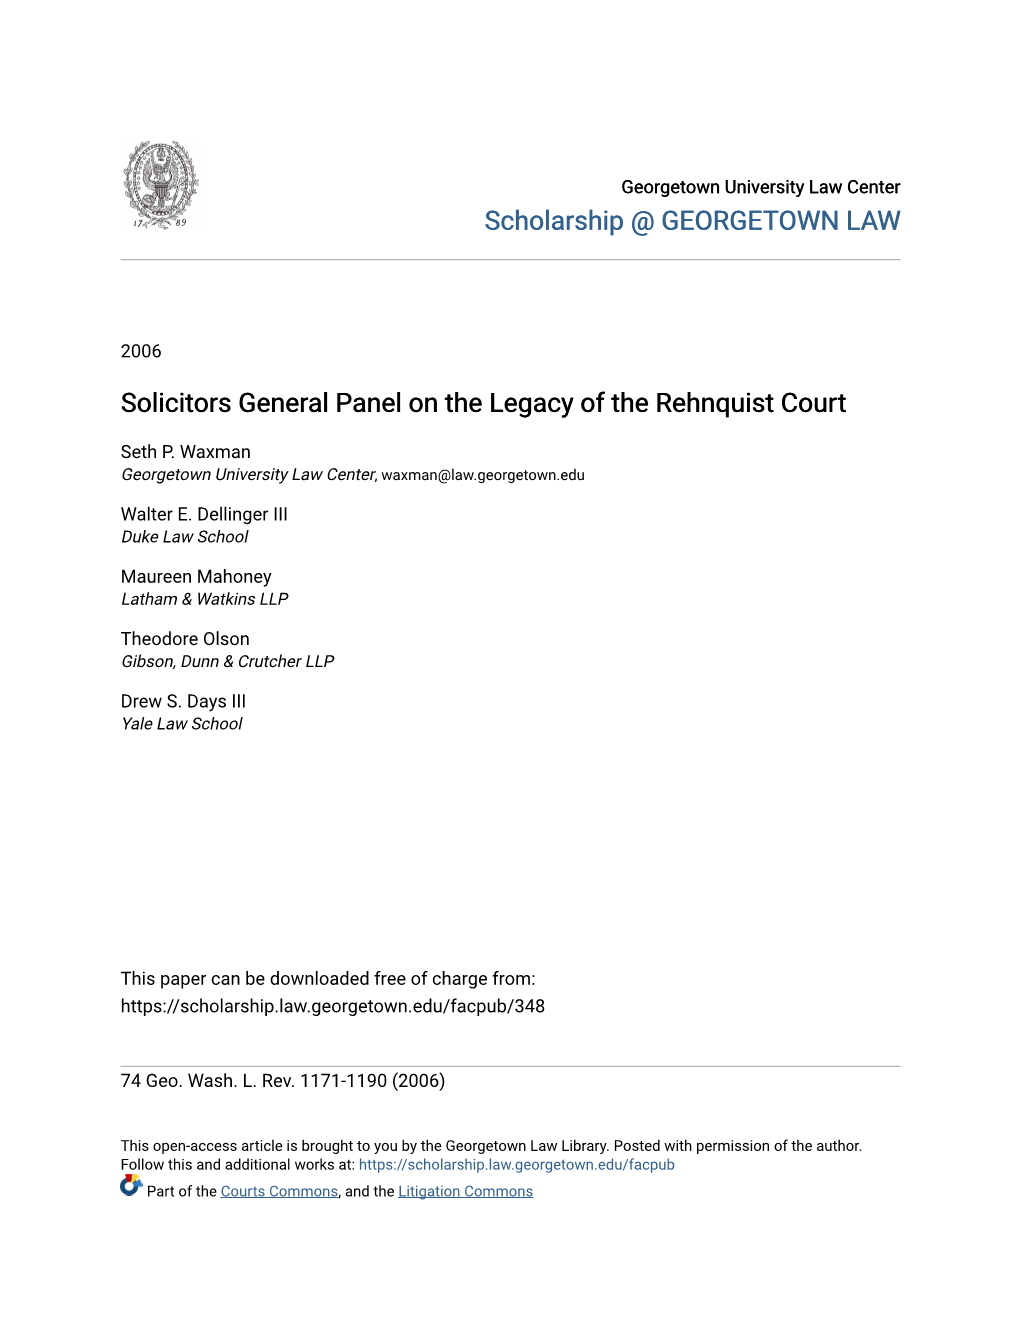 Solicitors General Panel on the Legacy of the Rehnquist Court